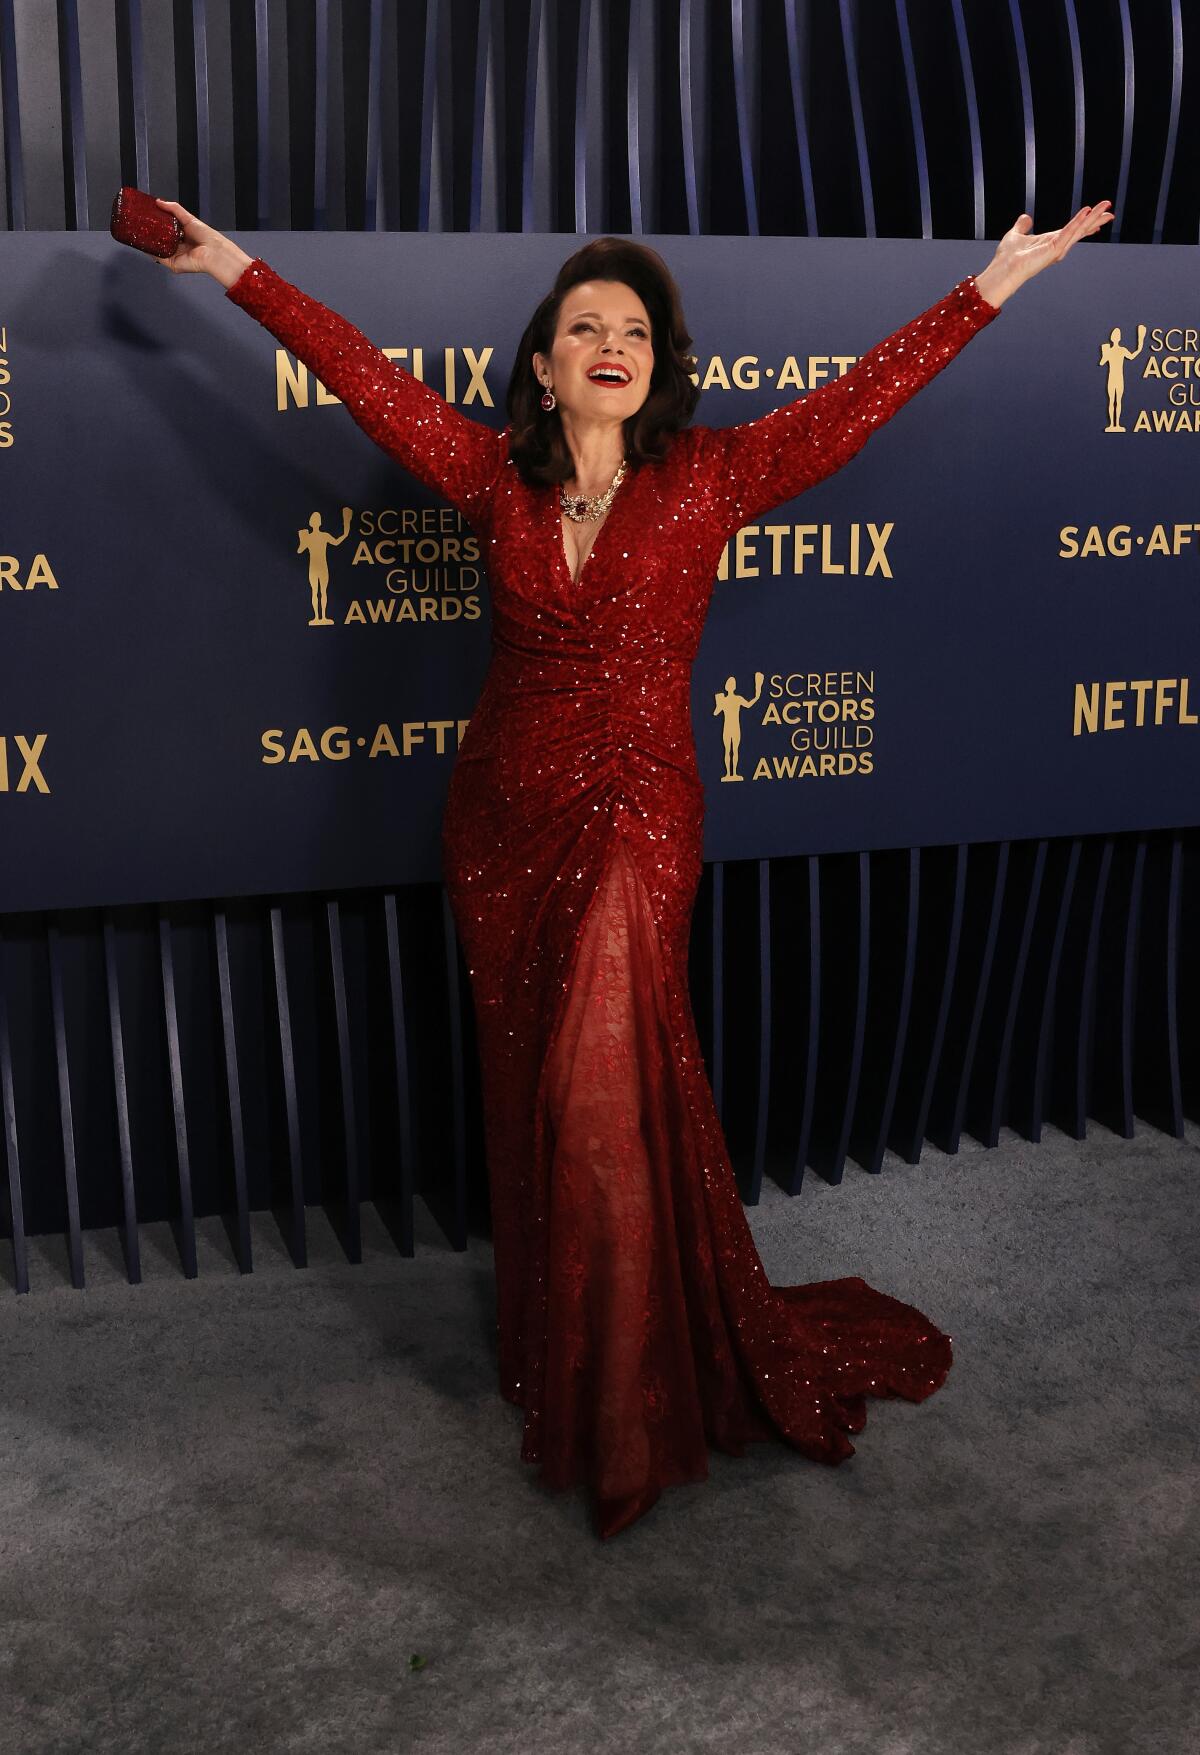 Fran Drescher arriving on the red carpet at the 30th Screen Actors Guild Awards